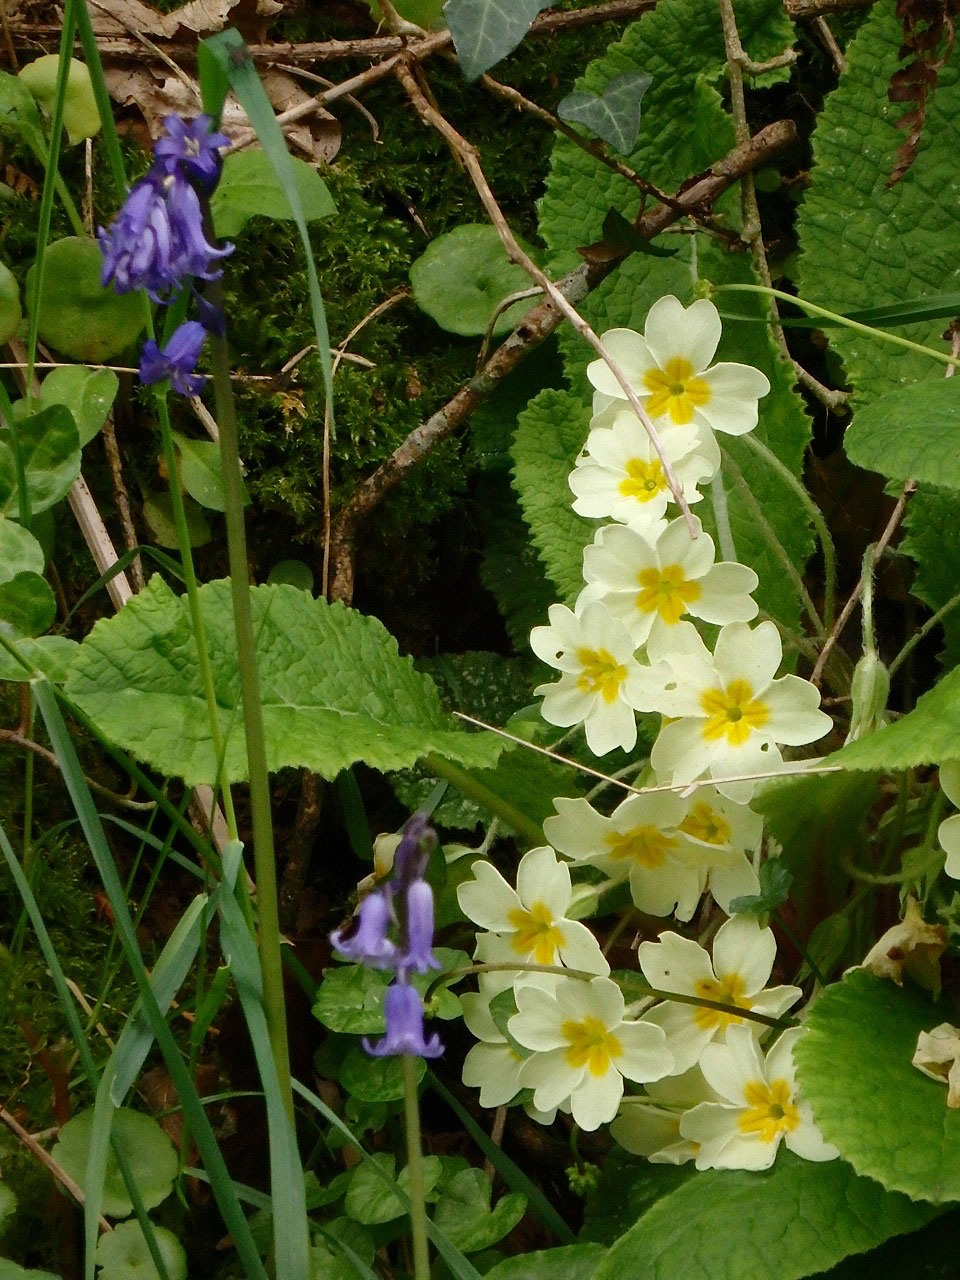 Bluebells with primroses